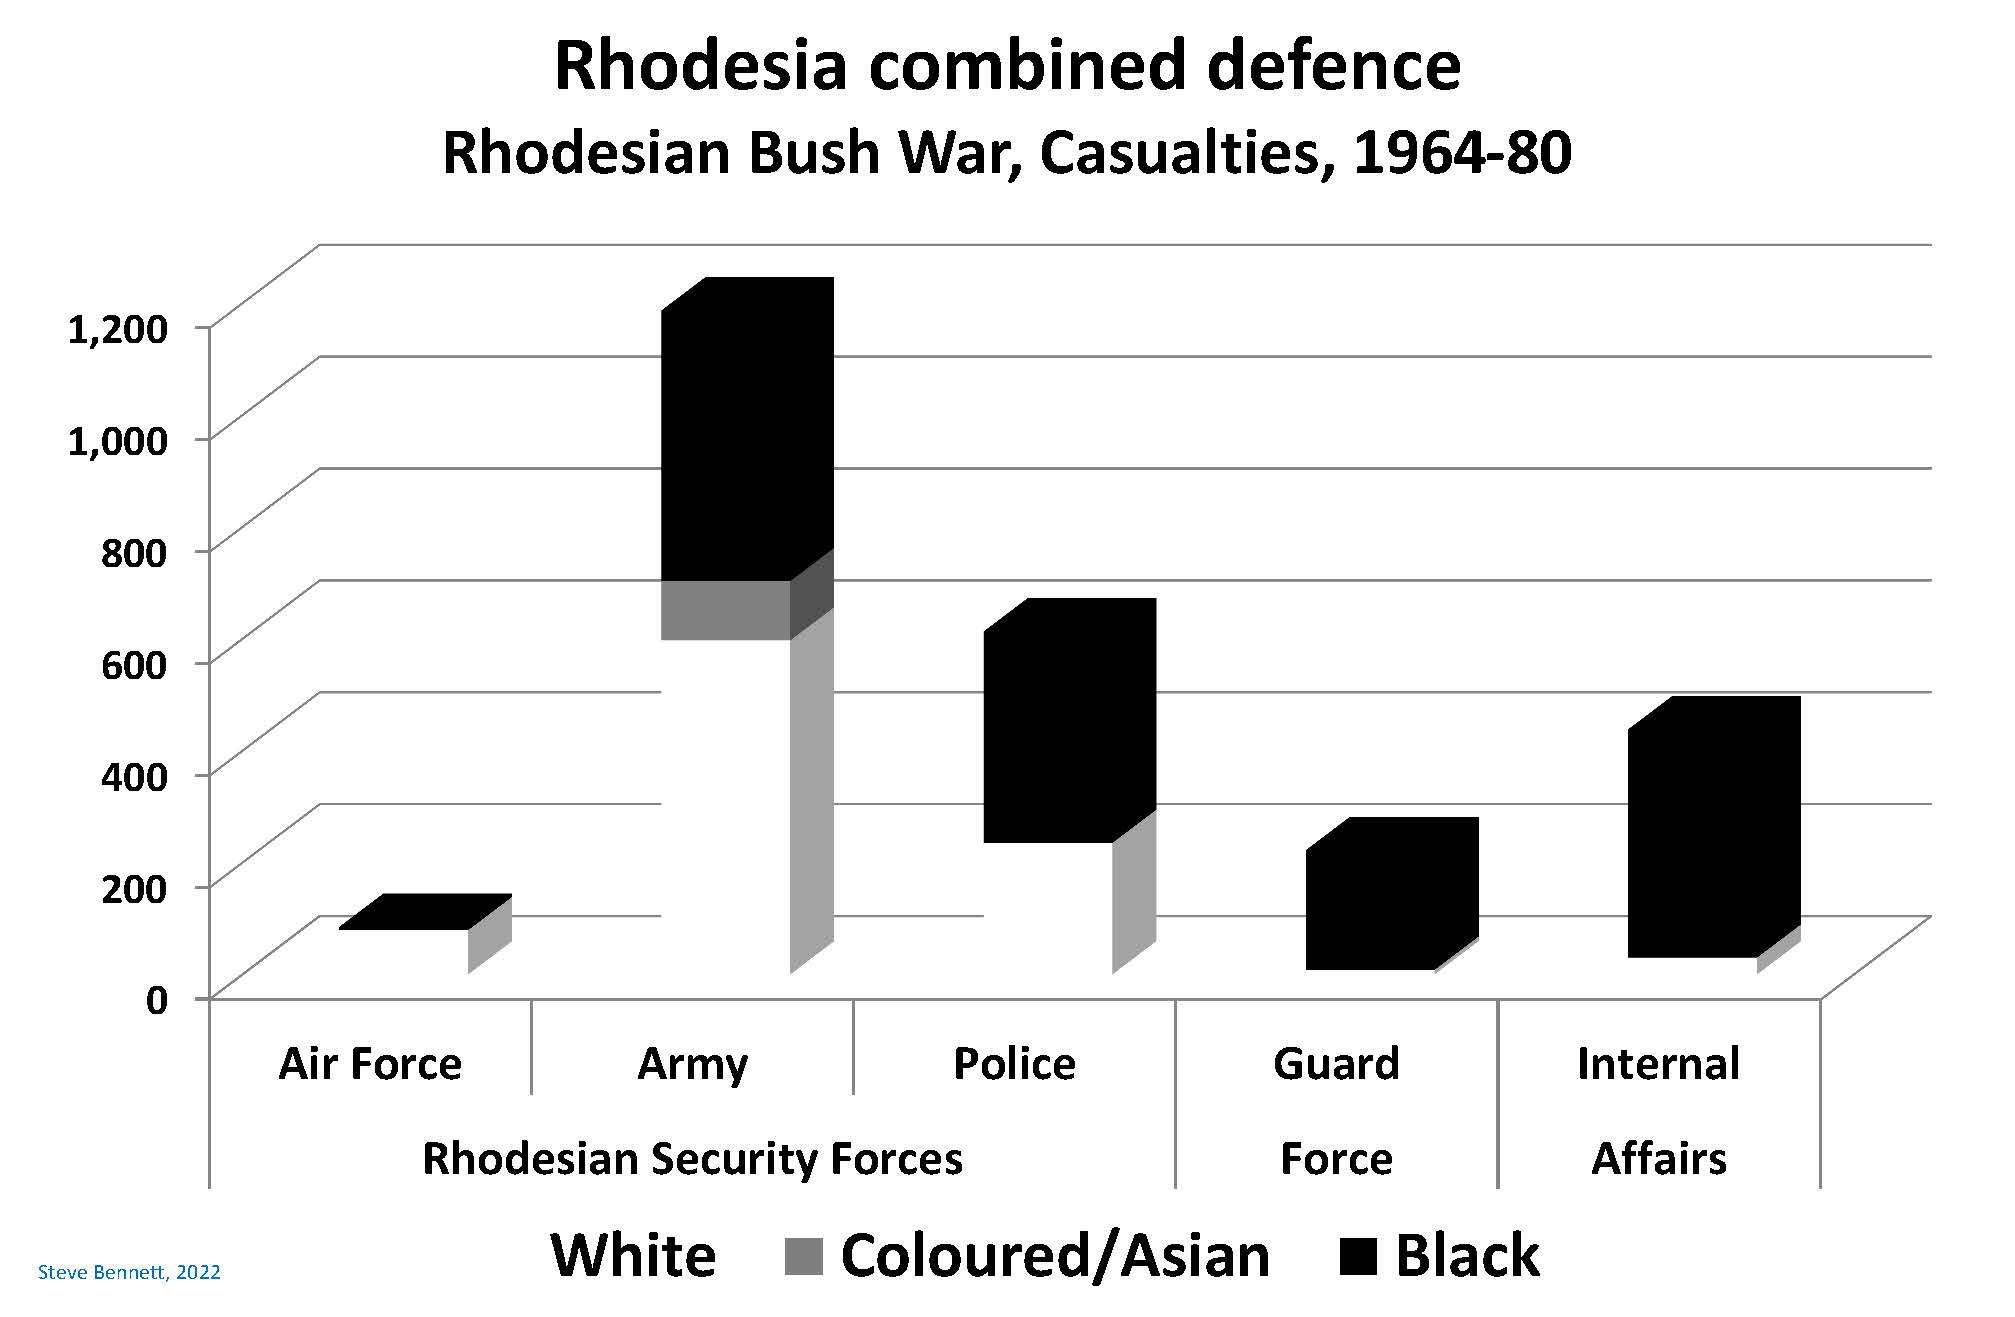 Chart illustrating casualties from air force, army and police in Rhodesian security forces plus gurad force and internal affairs during the Rhodesian bush war